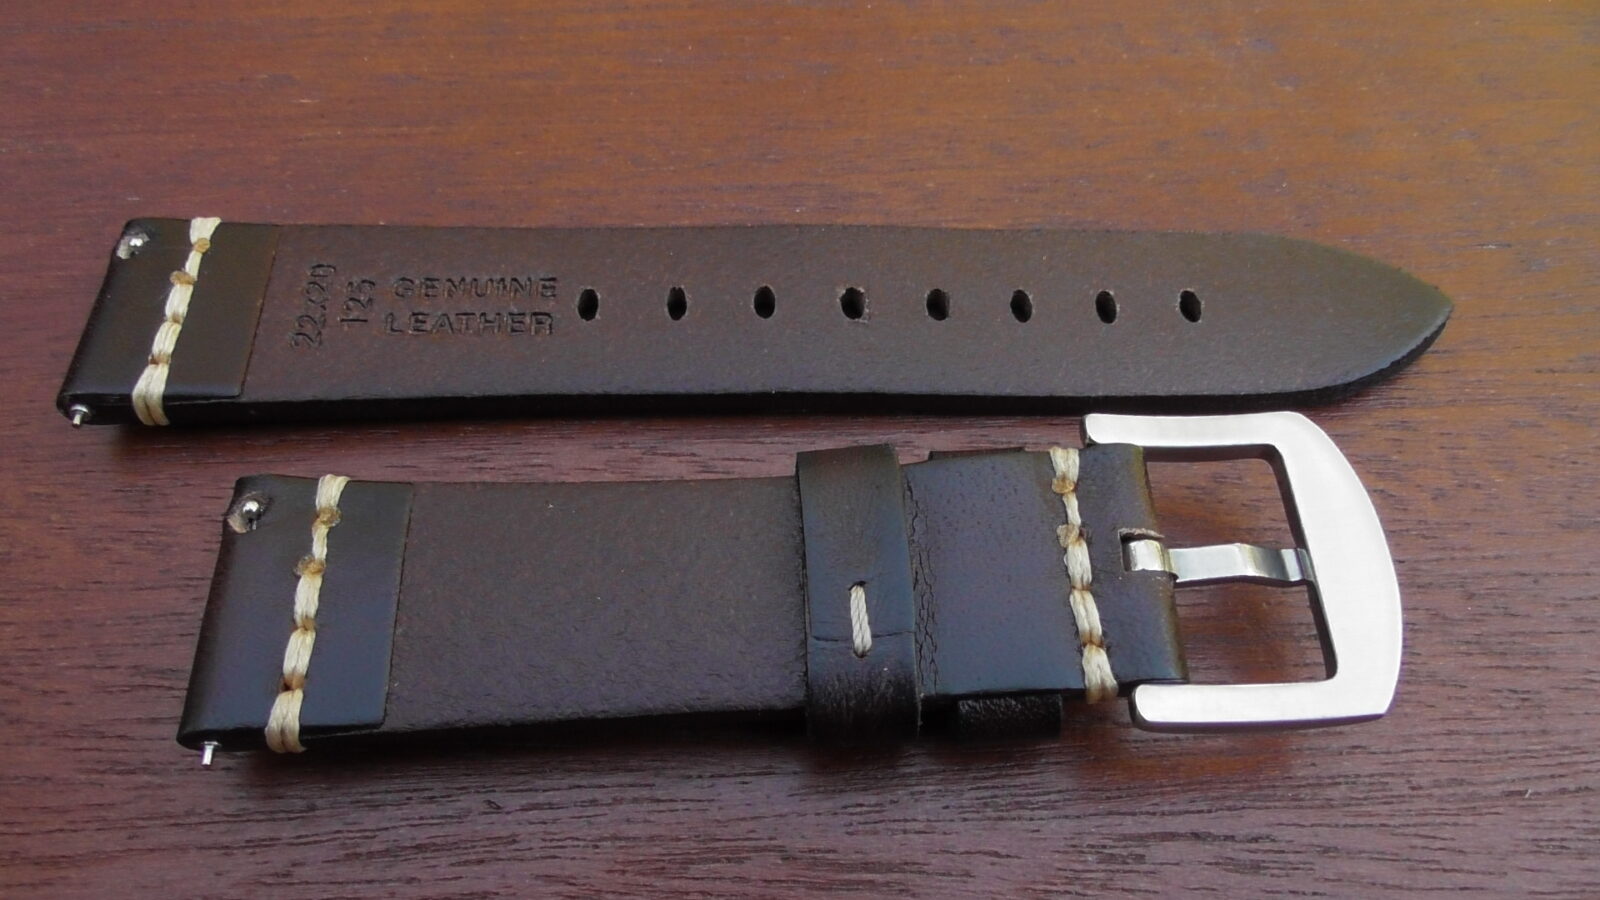 flaxton leather watch strap rear showing quick release spring bars